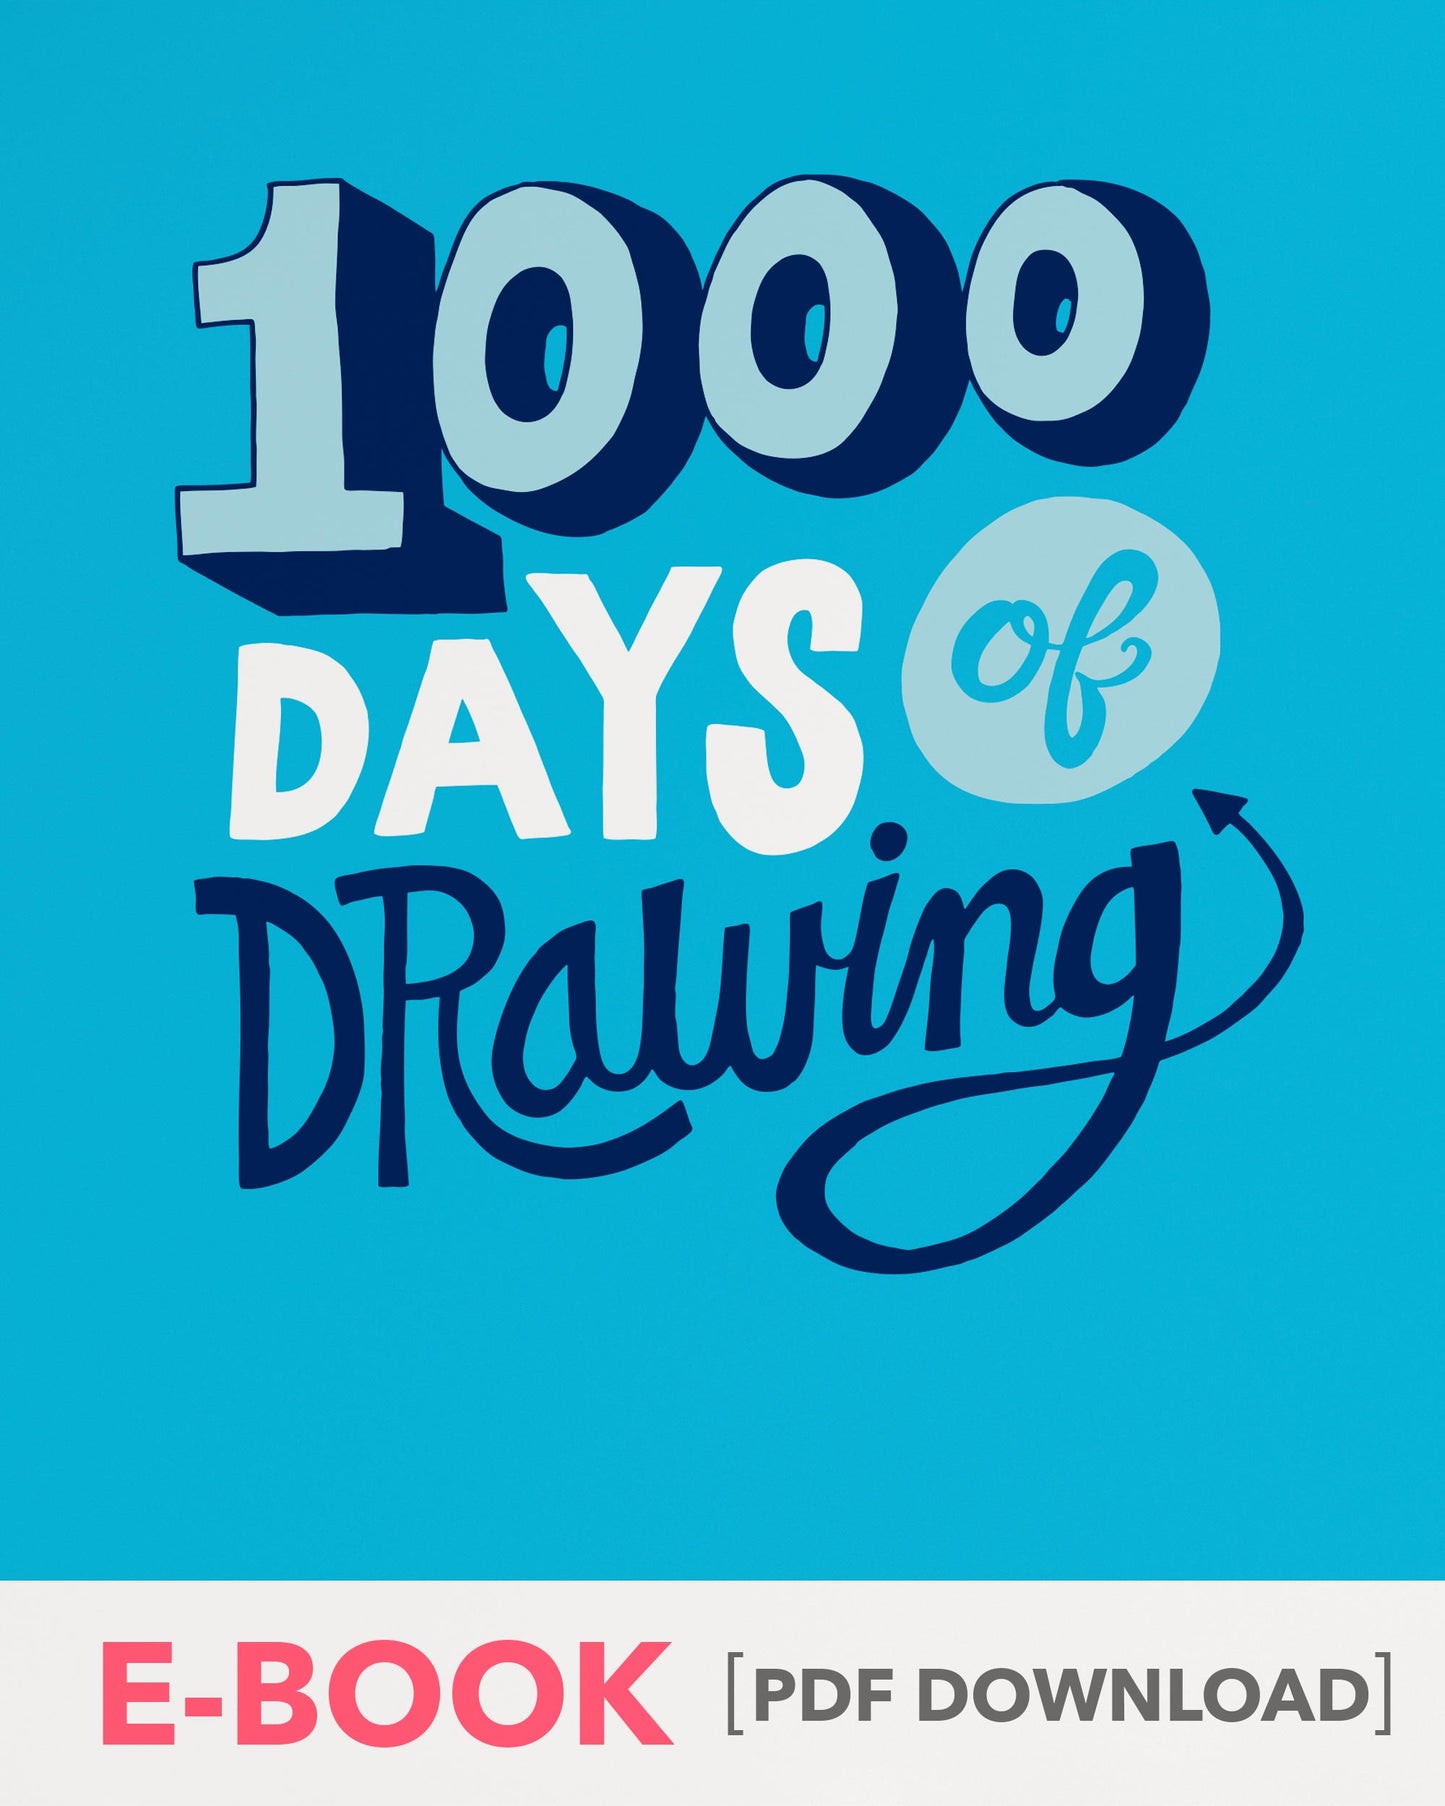 1000 Days of Drawing E-BOOK by Chris Piascik